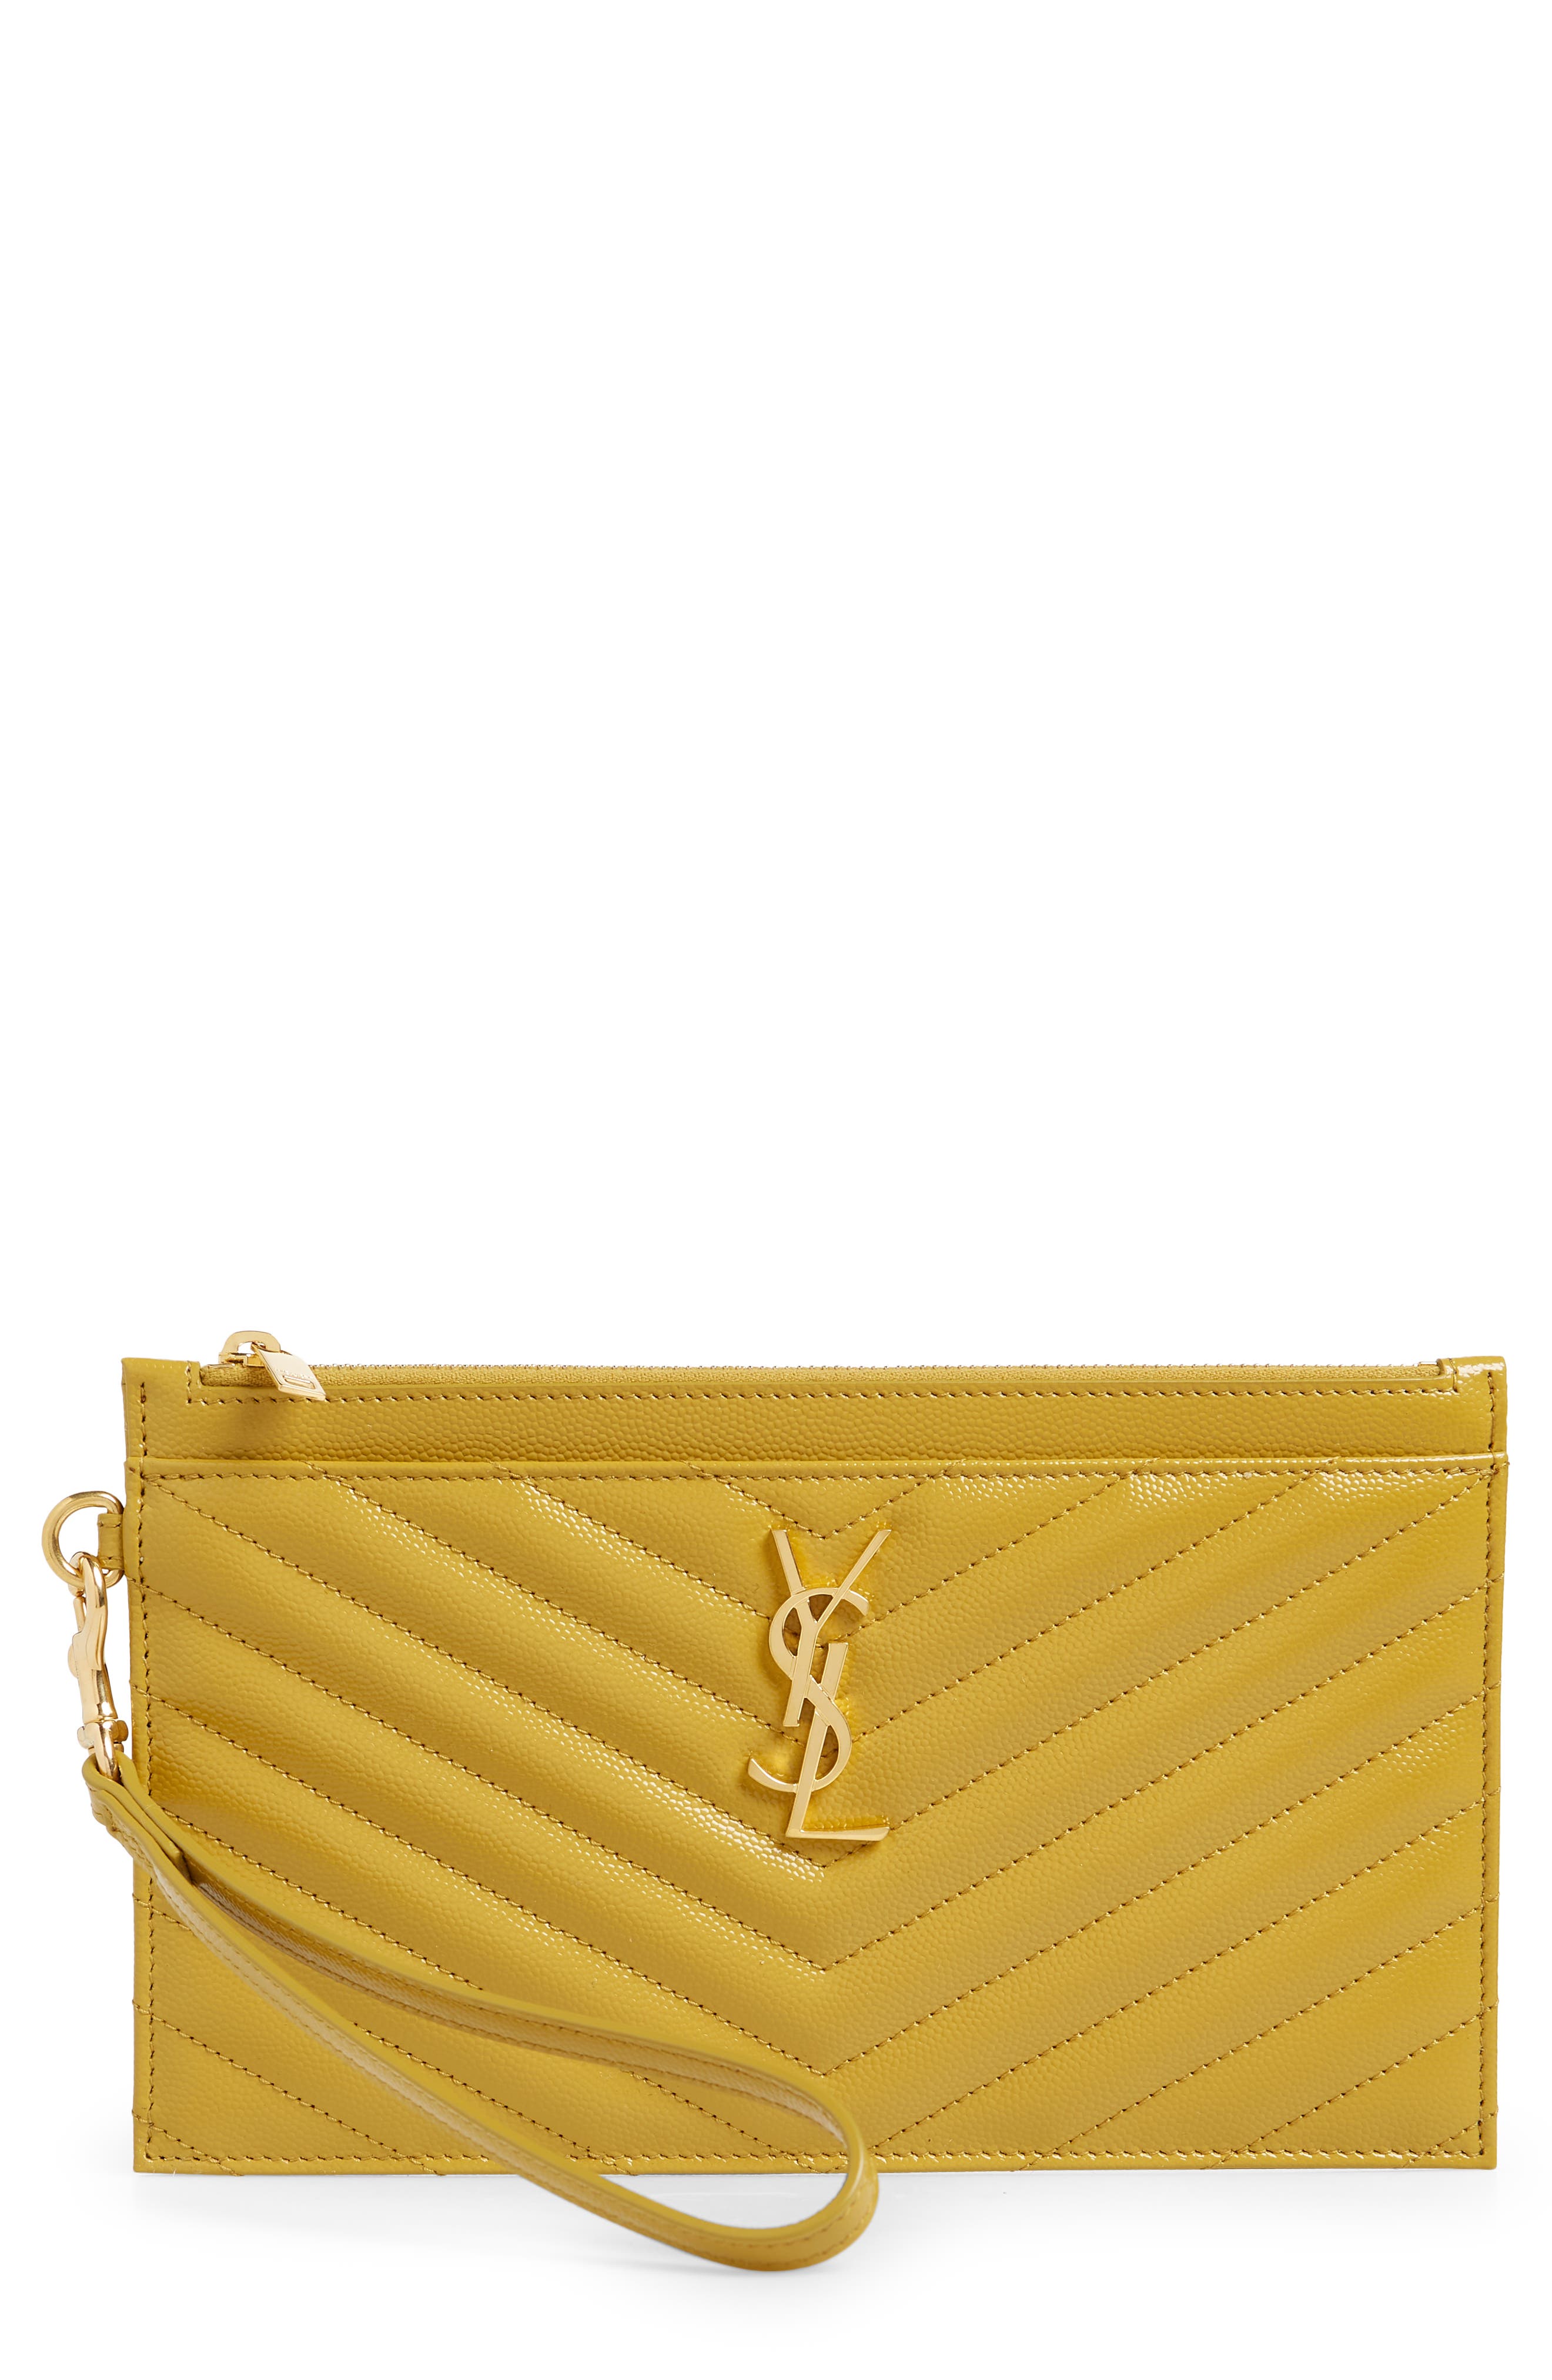 SAINT LAURENT Monogramme quilted textured-leather pouch